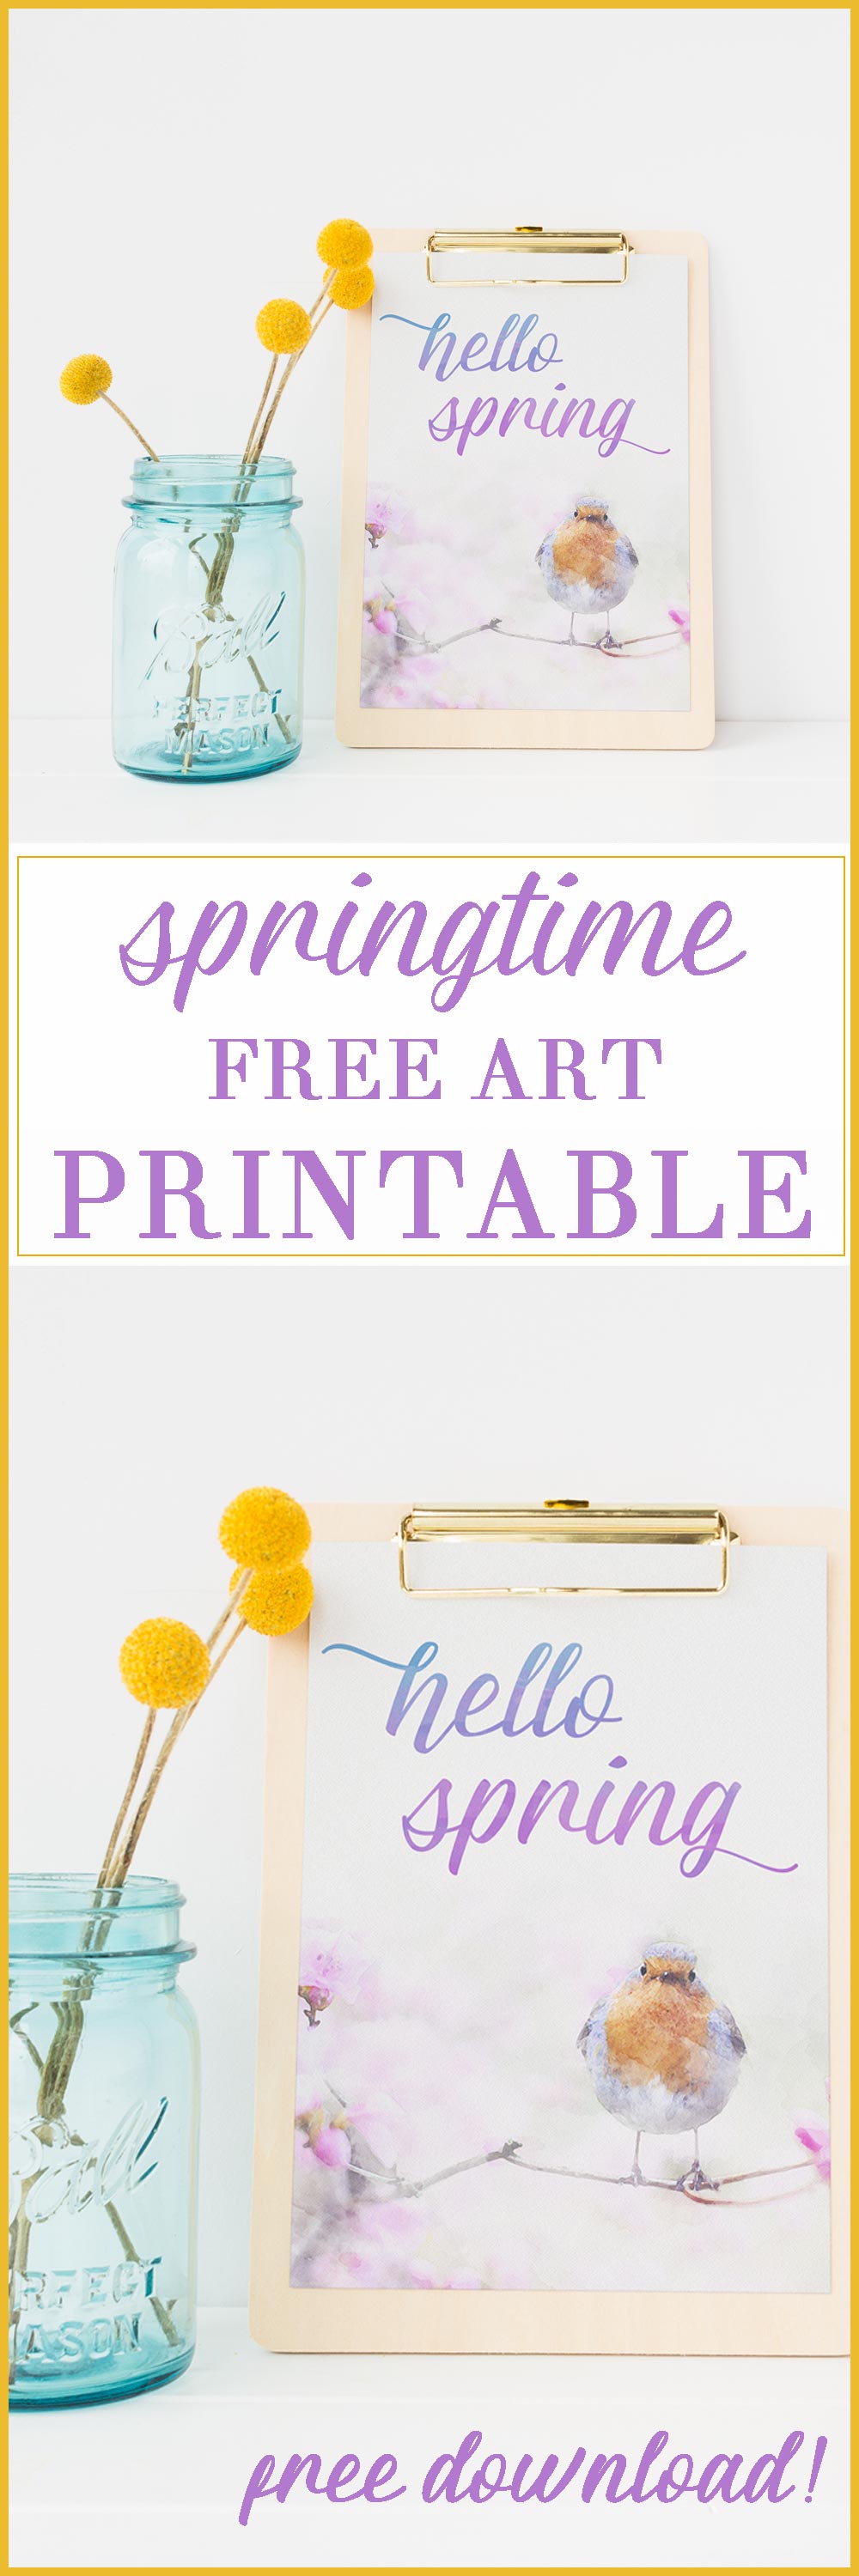 Looking for easy, affordable spring art? This gorgeous watercolor is free for you to download at www.theweatheredfox.com #spring #printable #decor